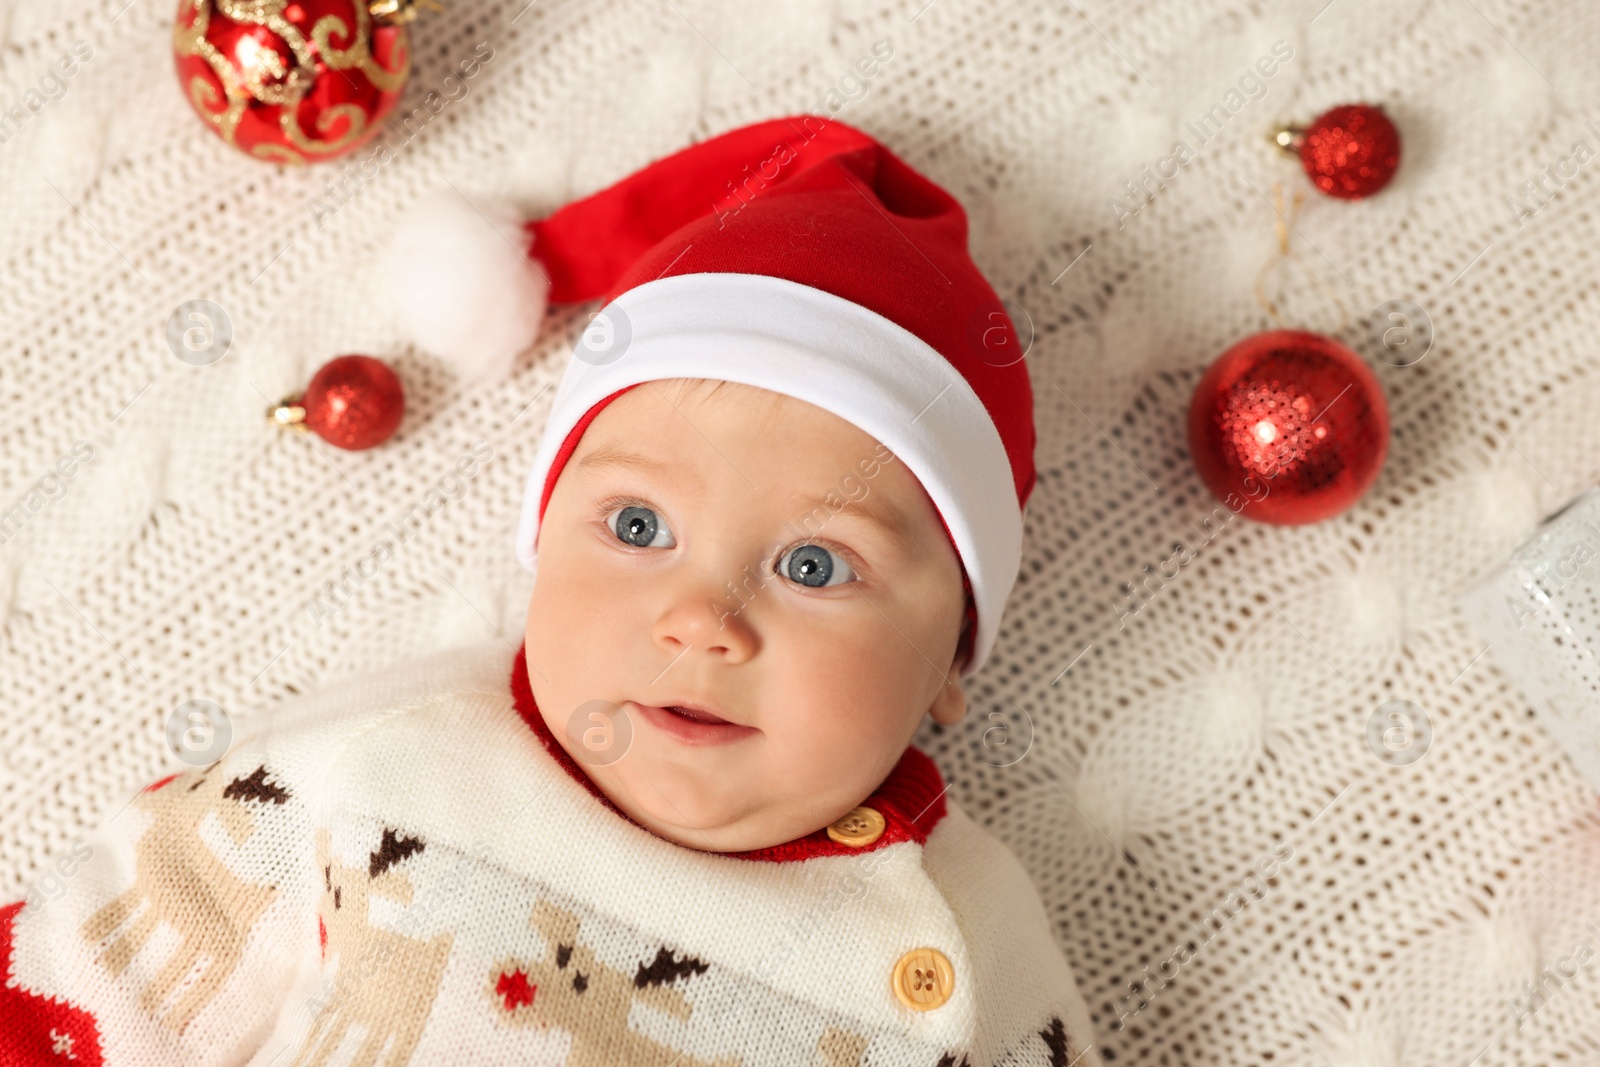 Photo of Cute little baby in Christmas outfit surrounded by  baubles on white knitted plaid, top view. Winter holiday